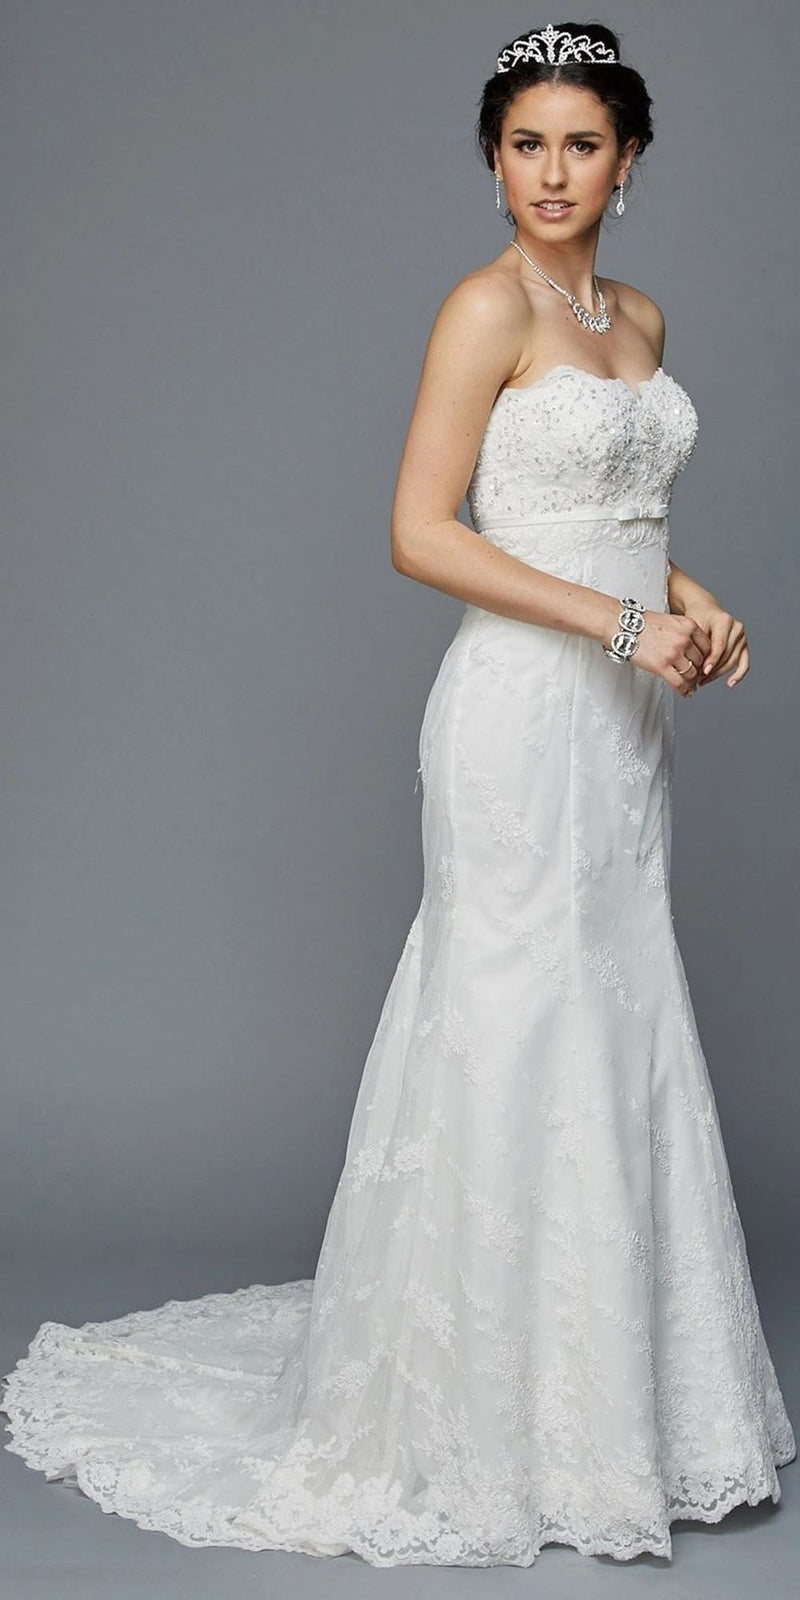 Embellished-Bodice Strapless Wedding Gown